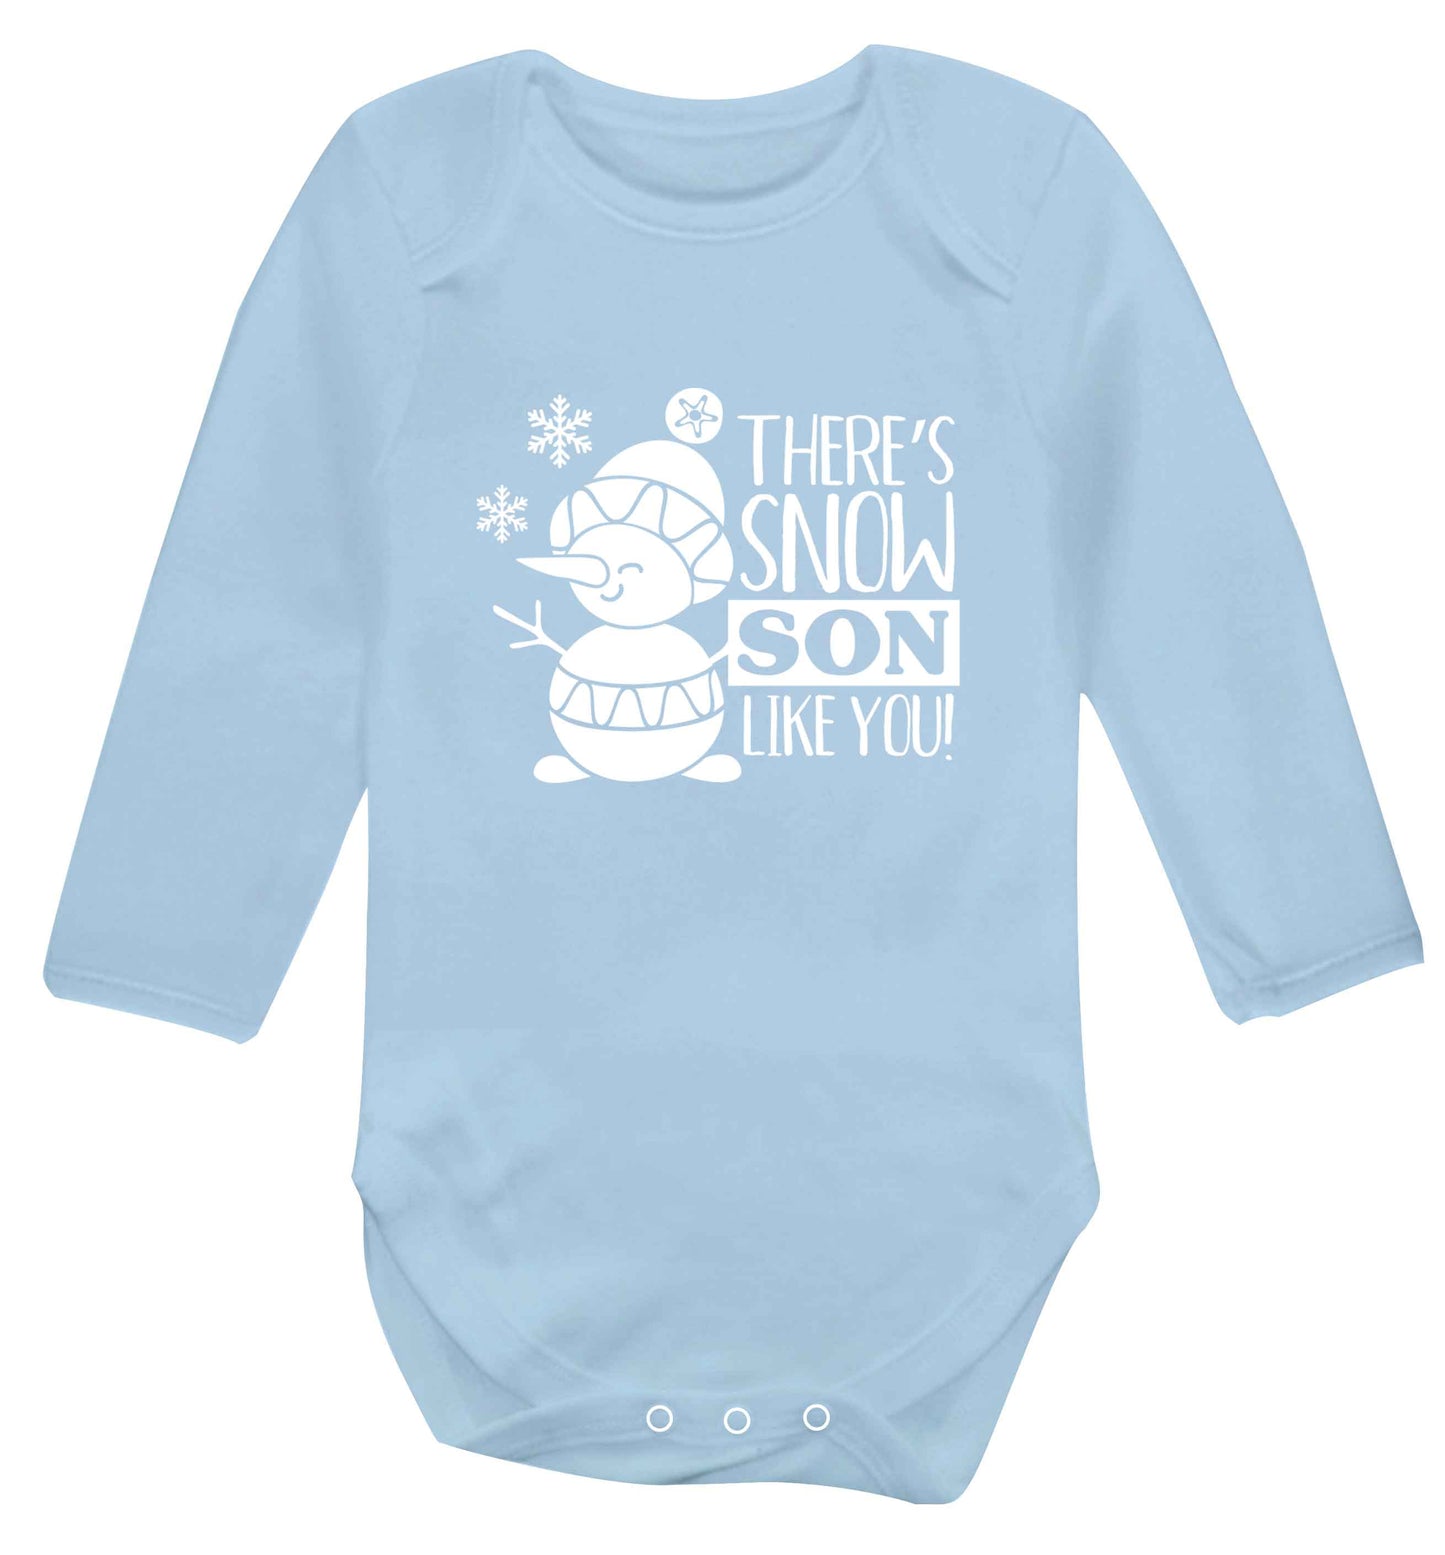 There's snow son like you baby vest long sleeved pale blue 6-12 months